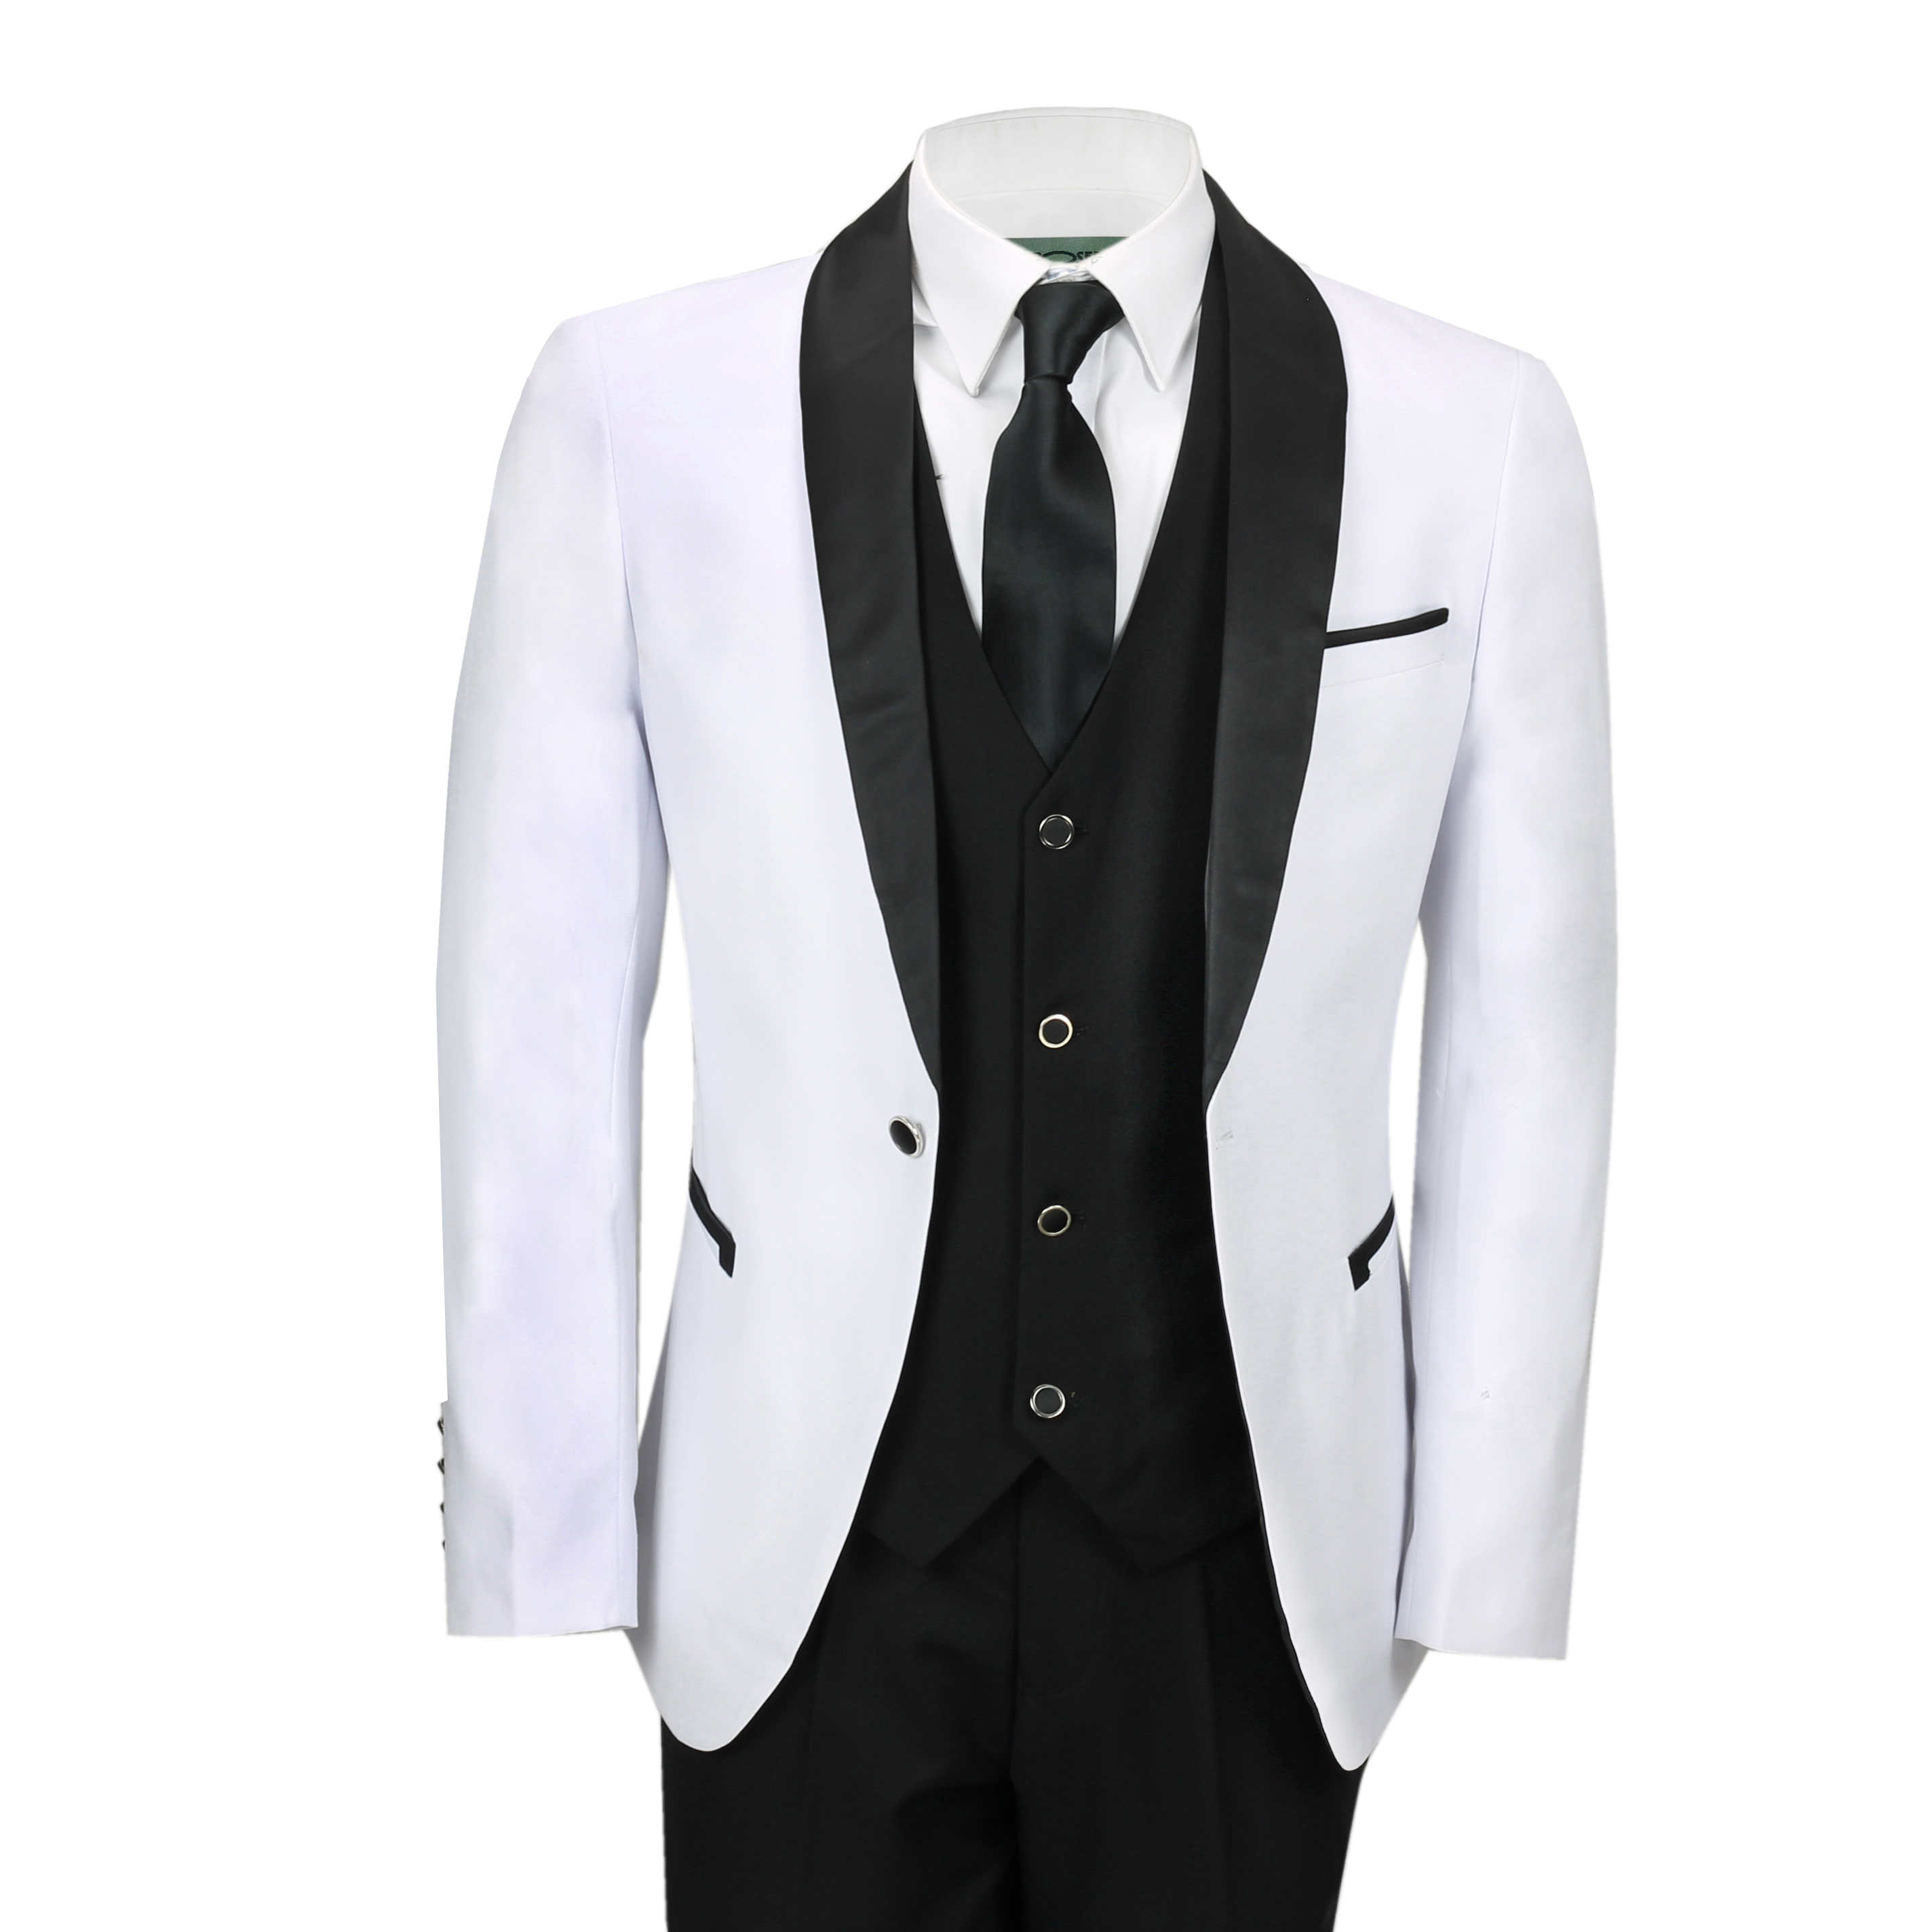 black and white formal suit